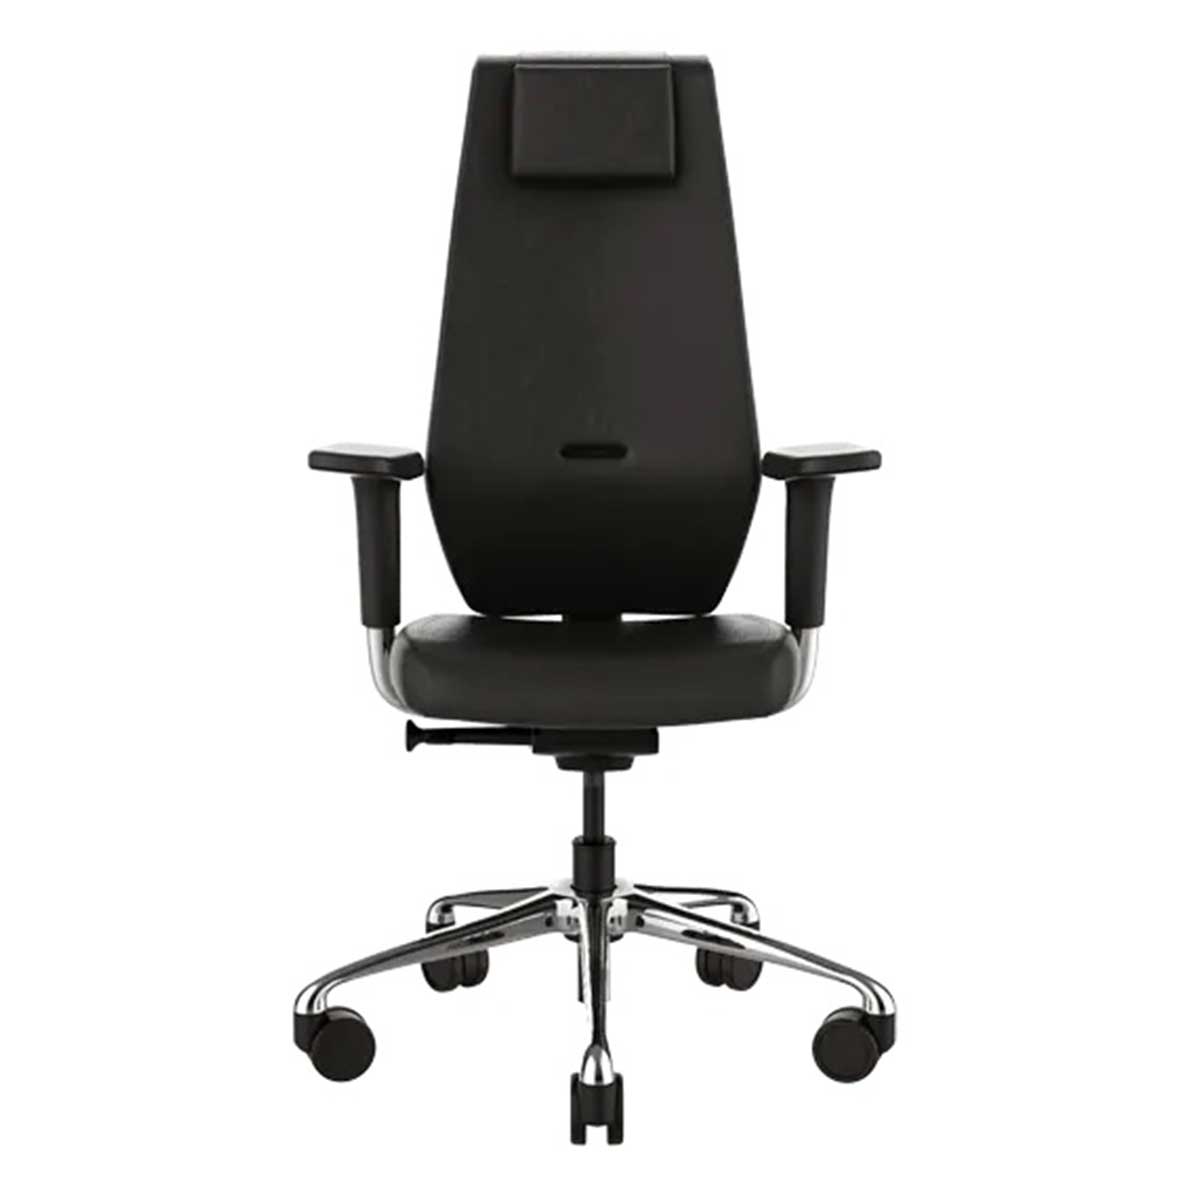 Mesh Executive Chair Manufacturers, Suppliers, Exporters in Delhi 